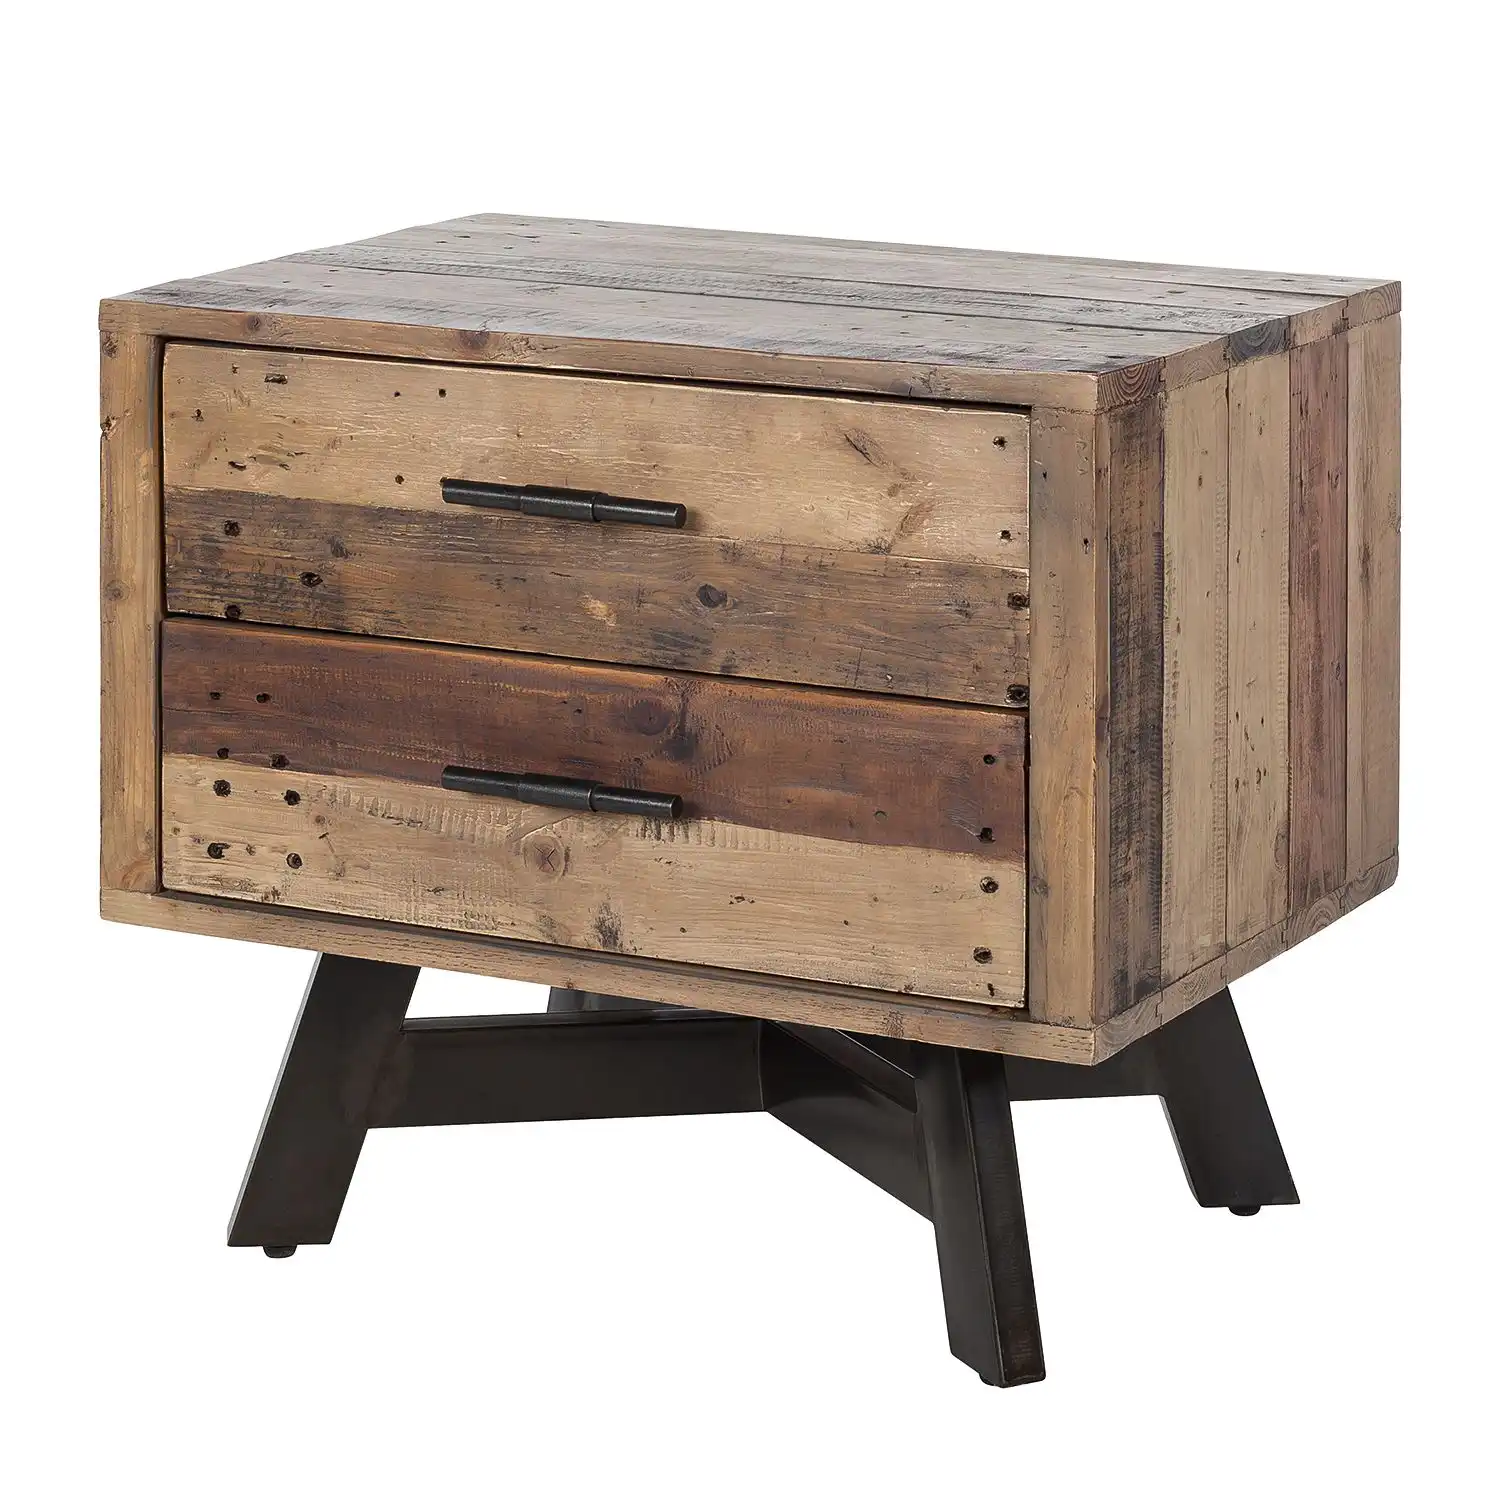 Reclaimed Wood Bedside / Side Table with 2 drawers - popular handicrafts